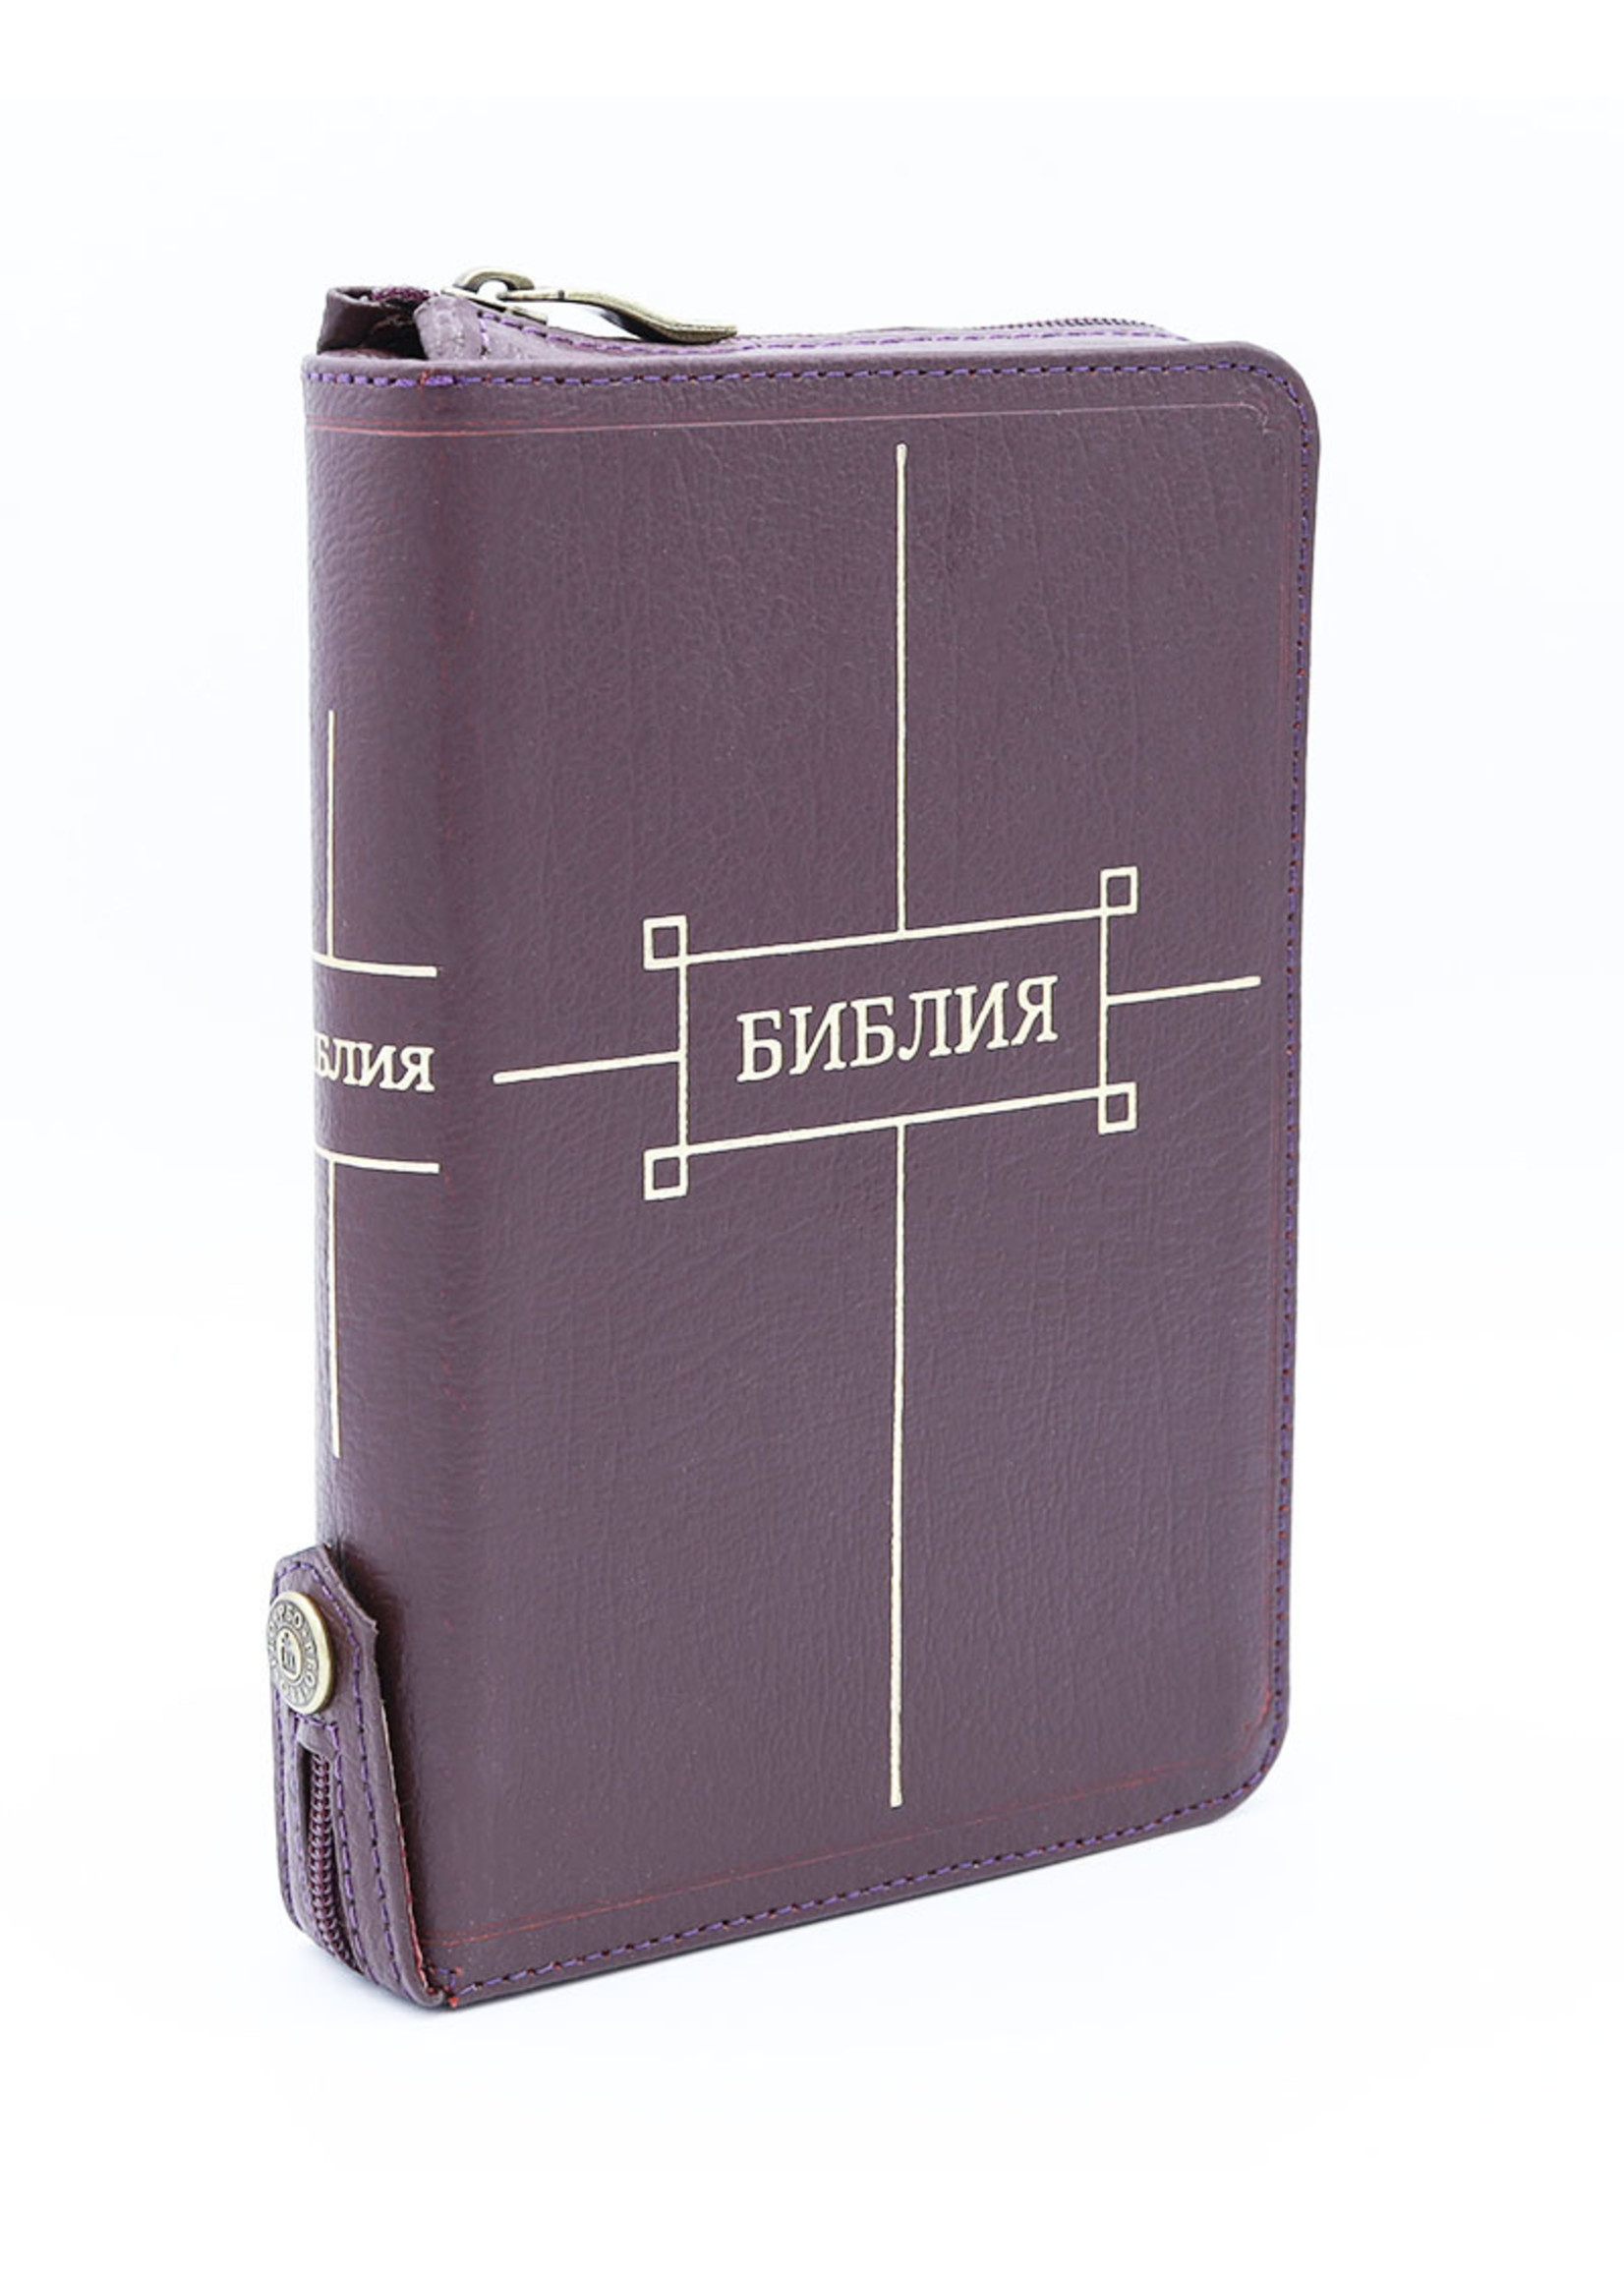 Библия, Каноническая (SYNO), Index, Leather with Zipper, Small Burgundy with Fixing Button